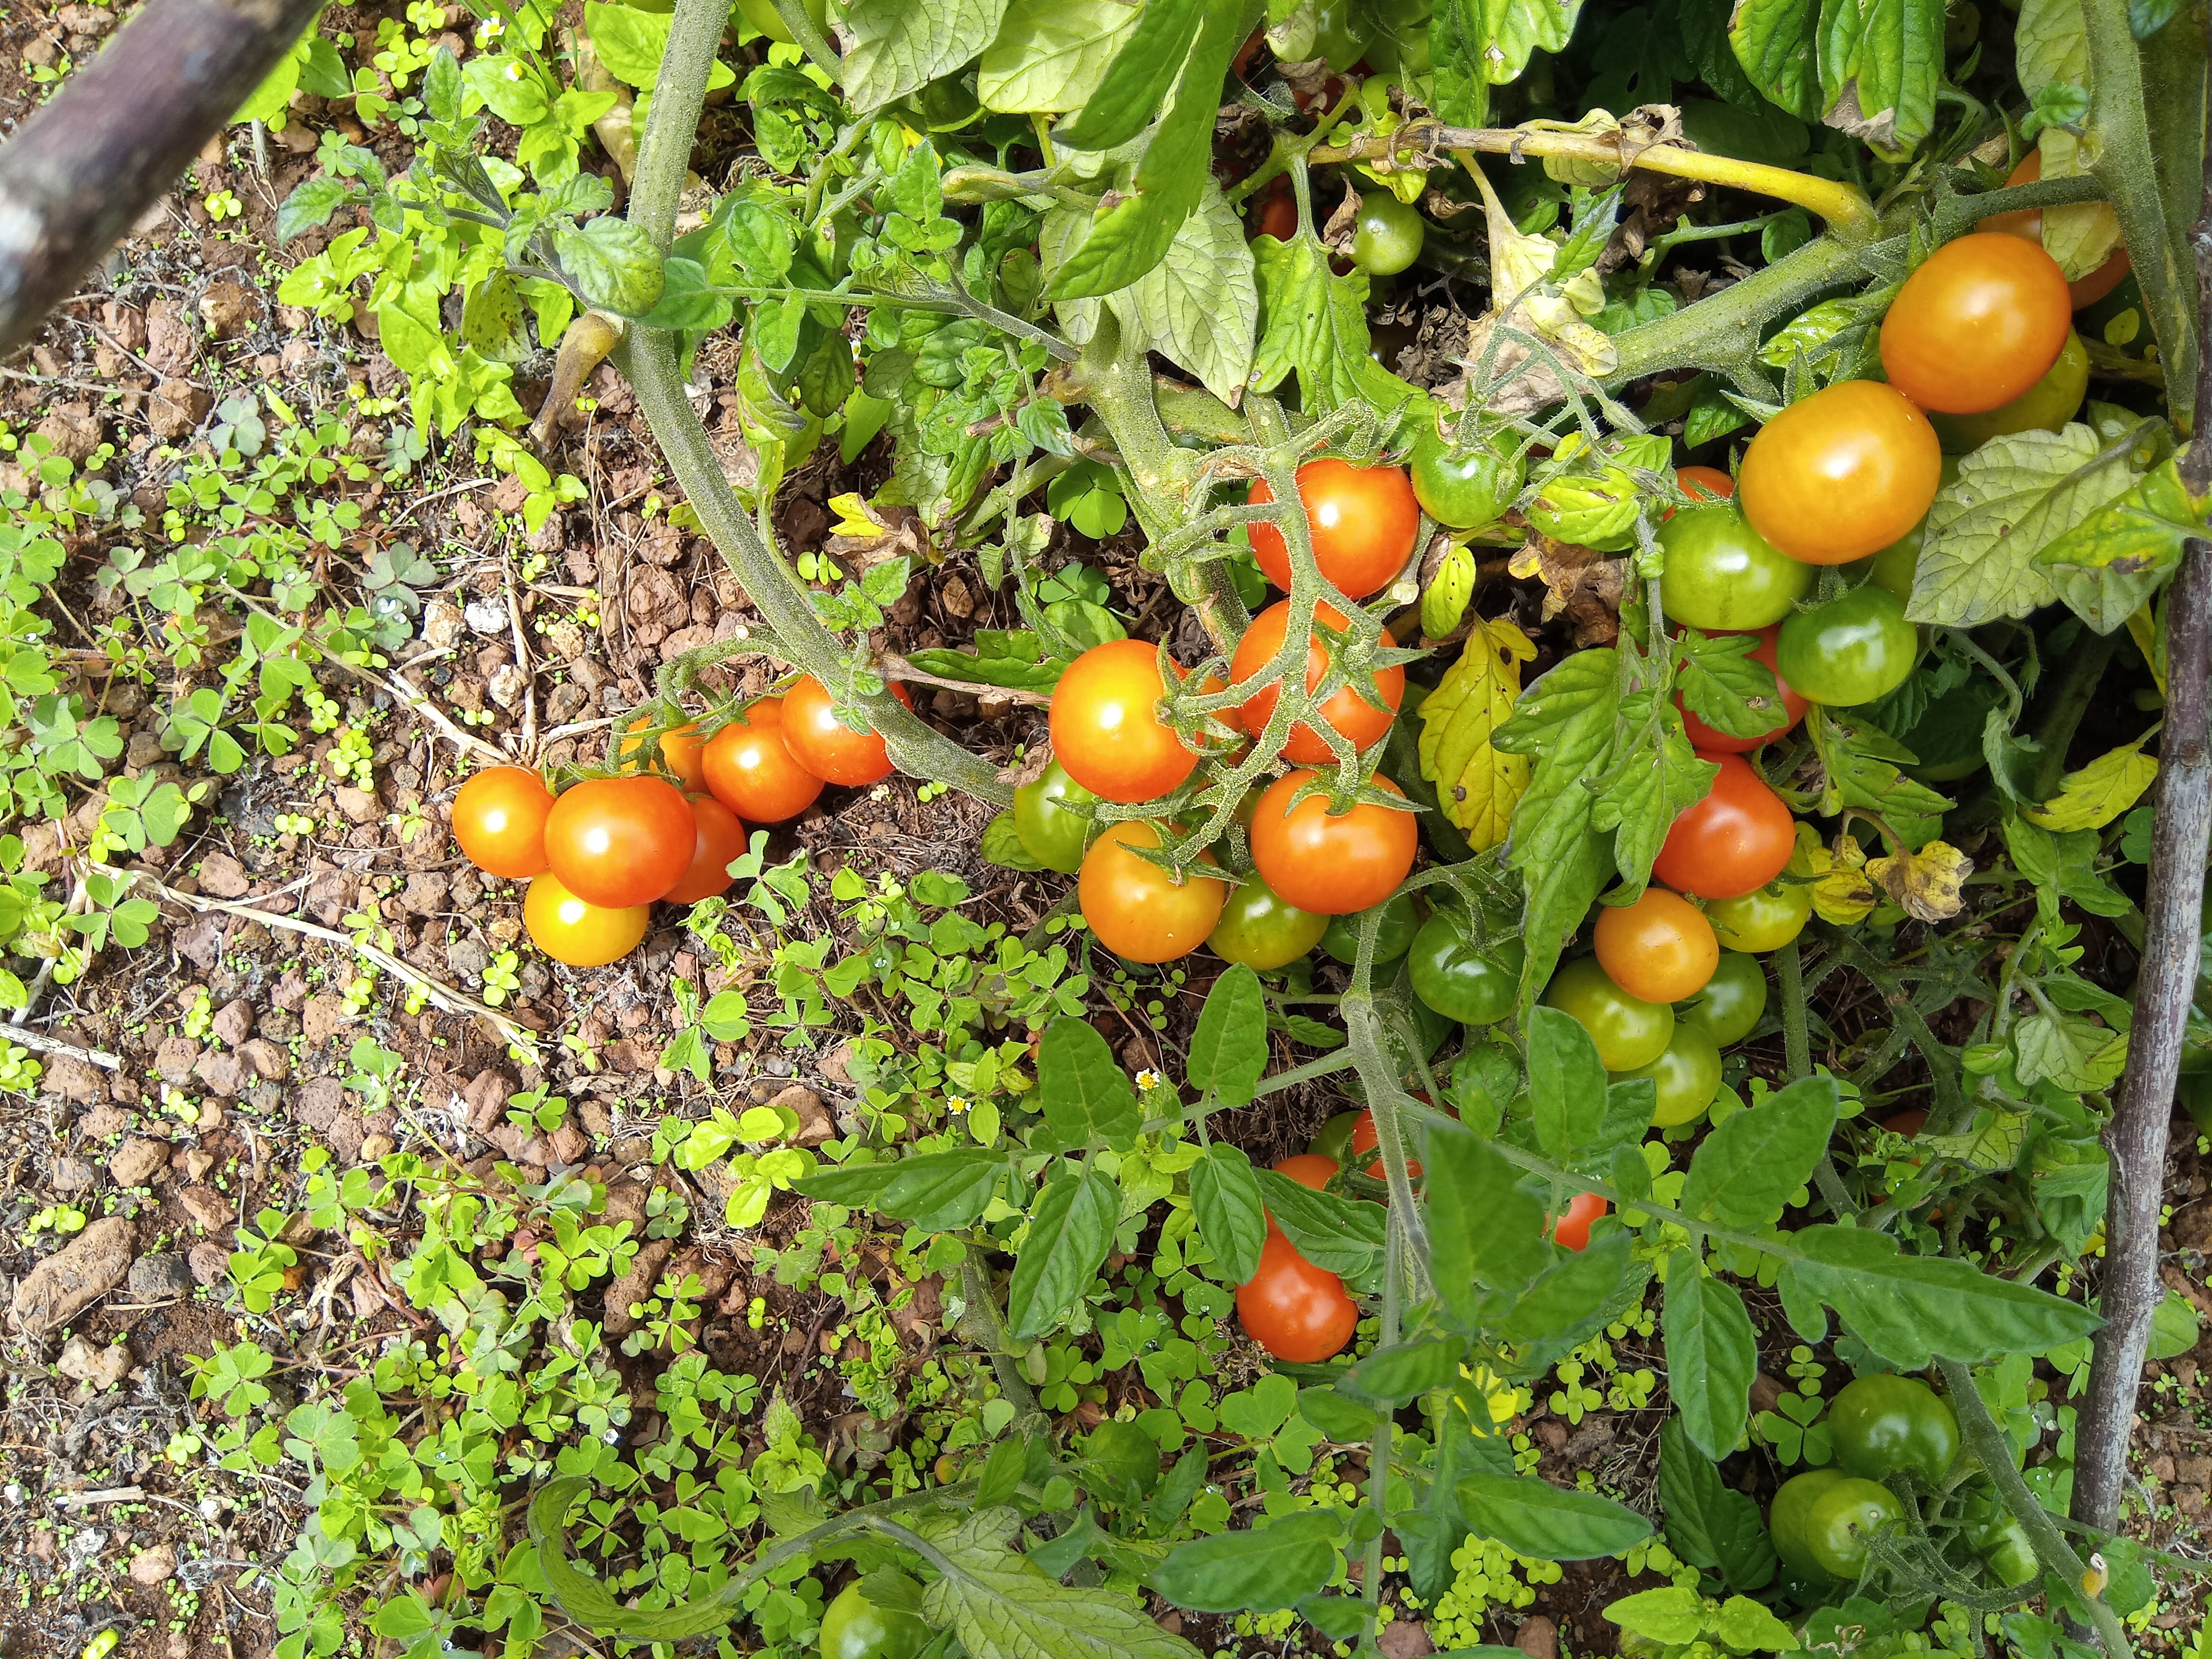 Tomatoes thrive in direct sunlight